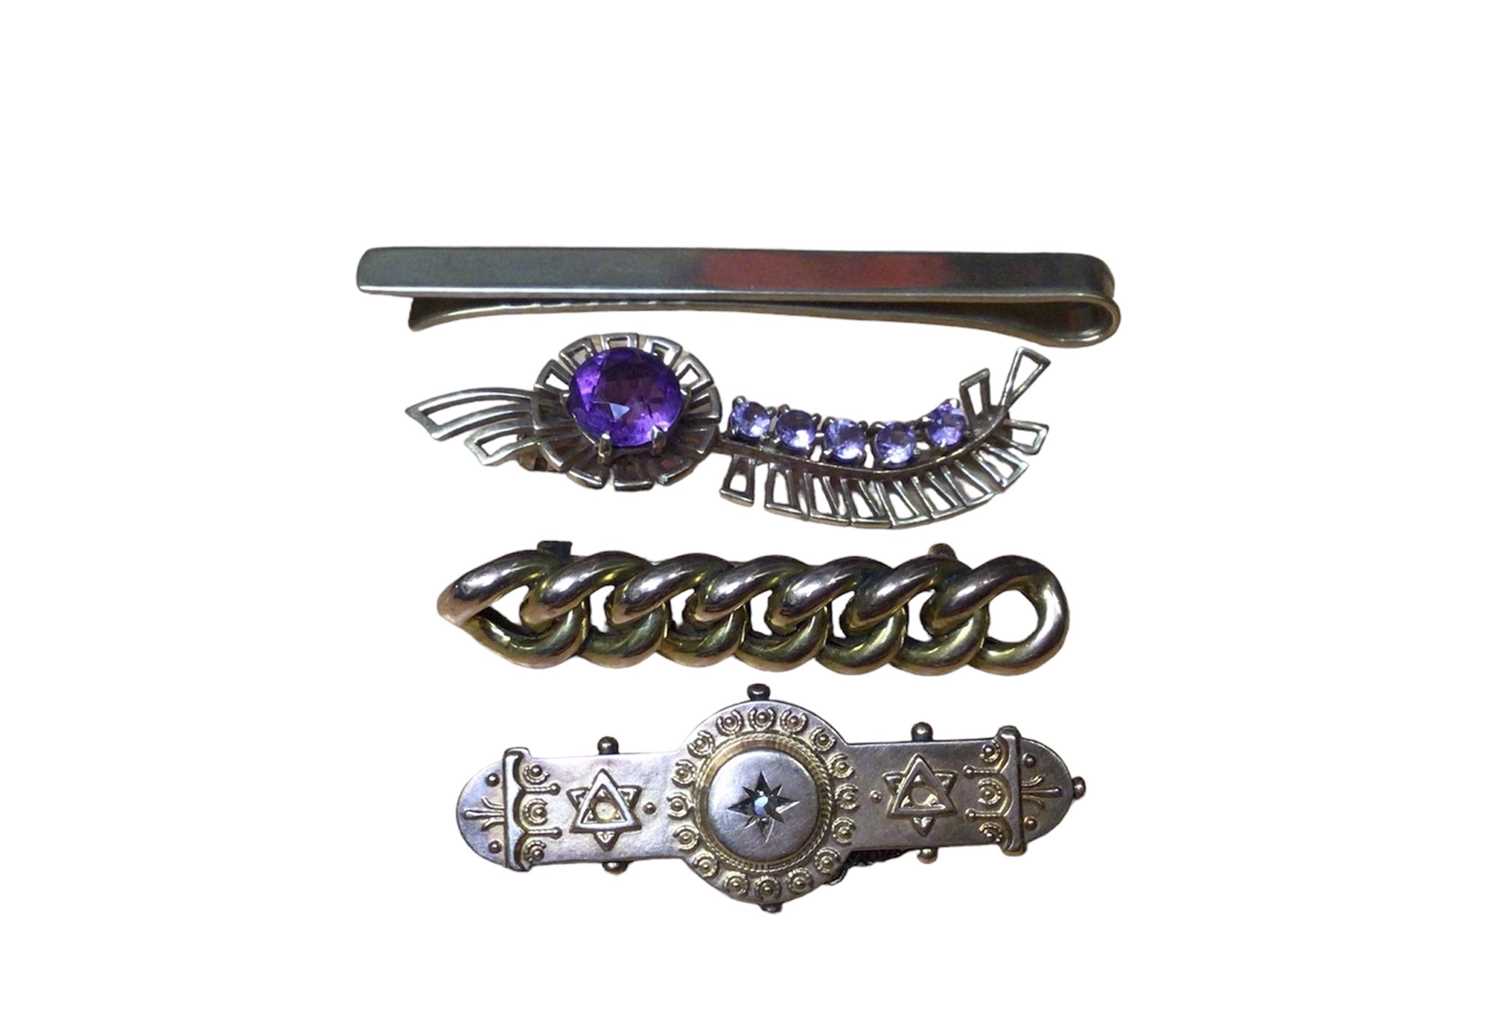 Lot 3 - Two Edwardian 9ct gold bar brooches, 9ct gold brooch set with purple gem stones and a 9ct gold tie clip